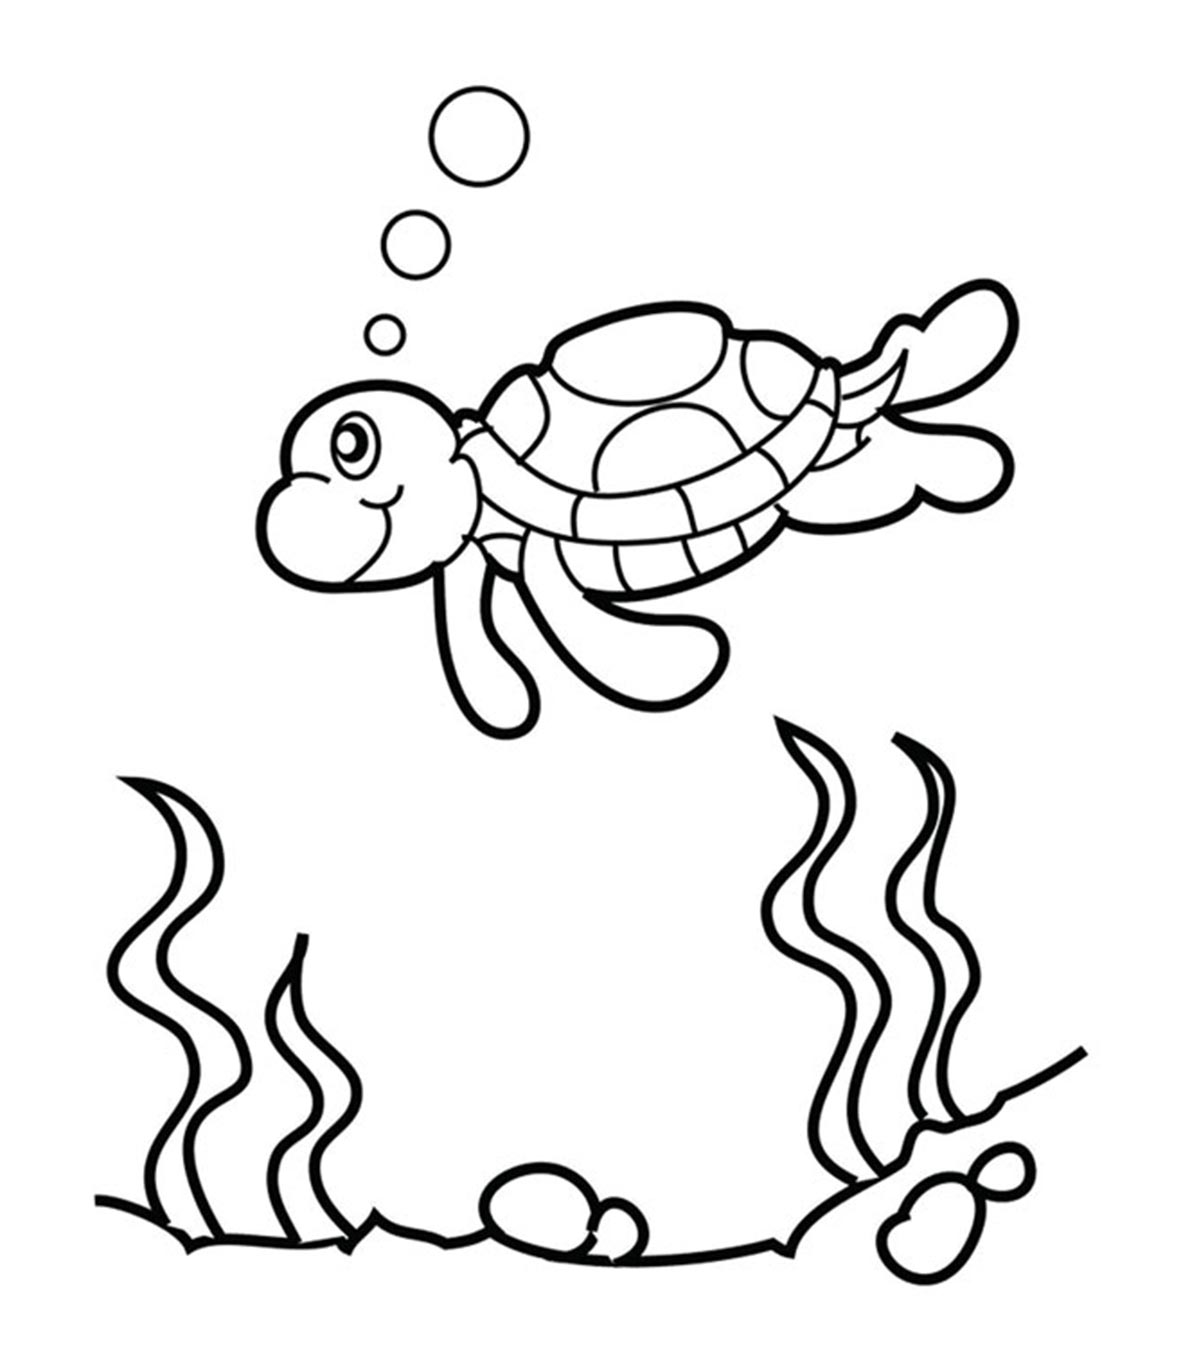 10 Cute Sea Turtle Coloring Pages Your Toddler Will Love To Color